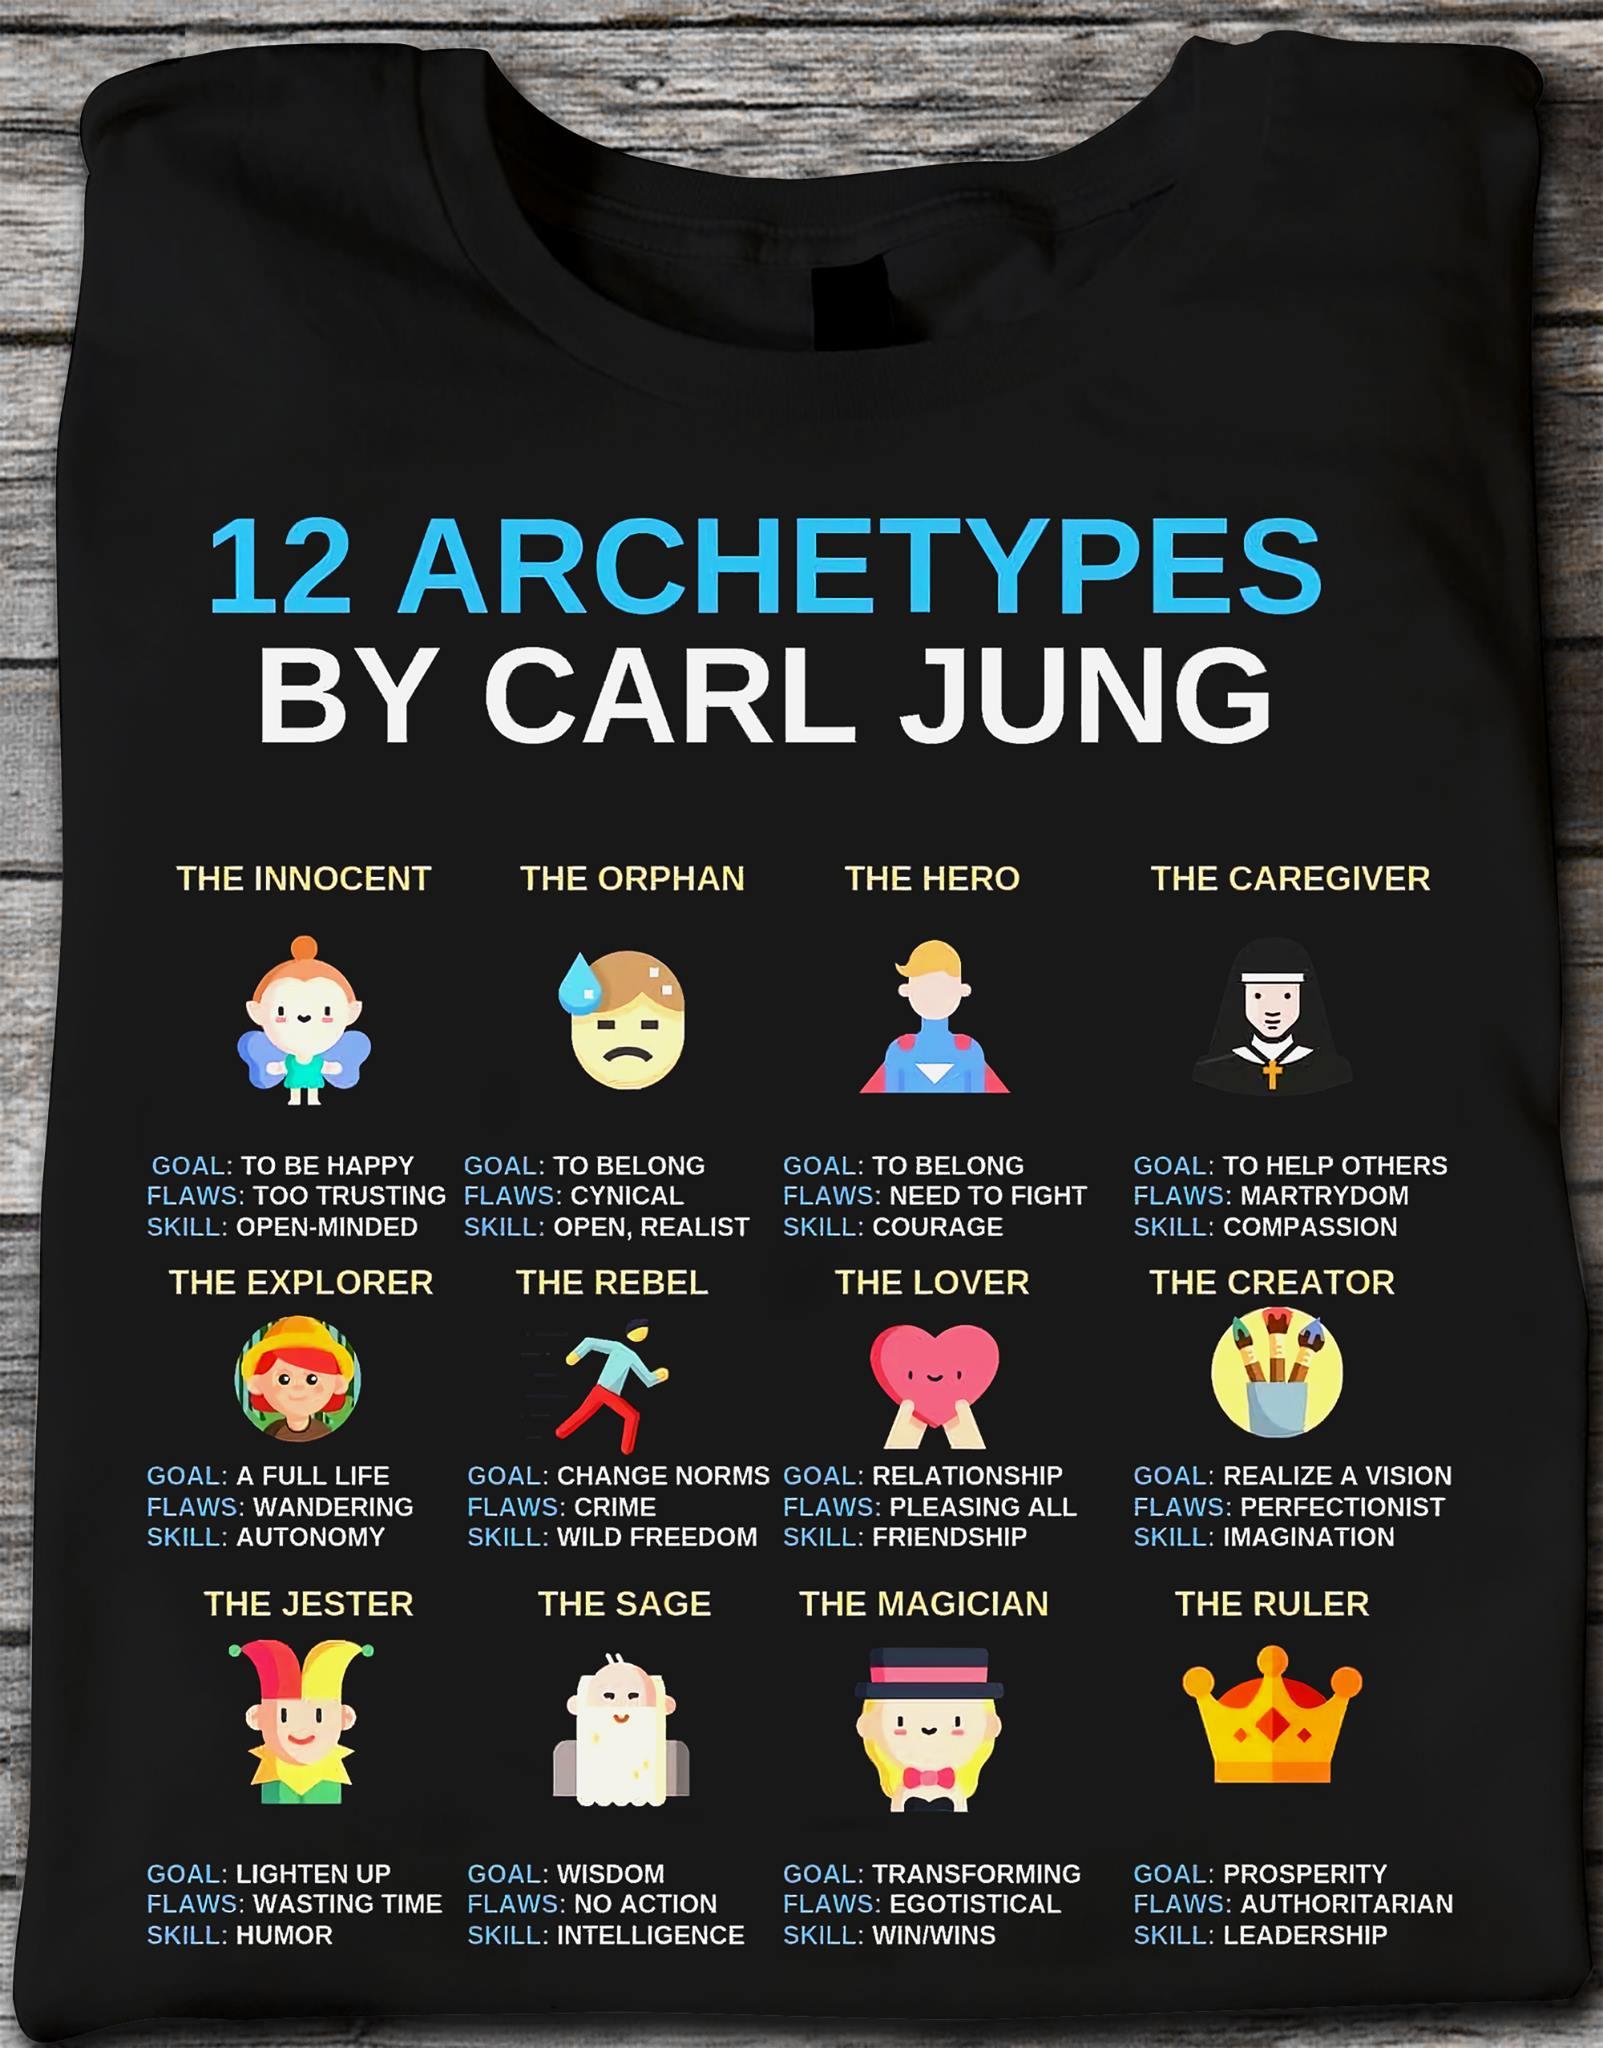 12 Archetypes by Carl Jung - The innocent, the orphan, the hero, the caregiver, the jester